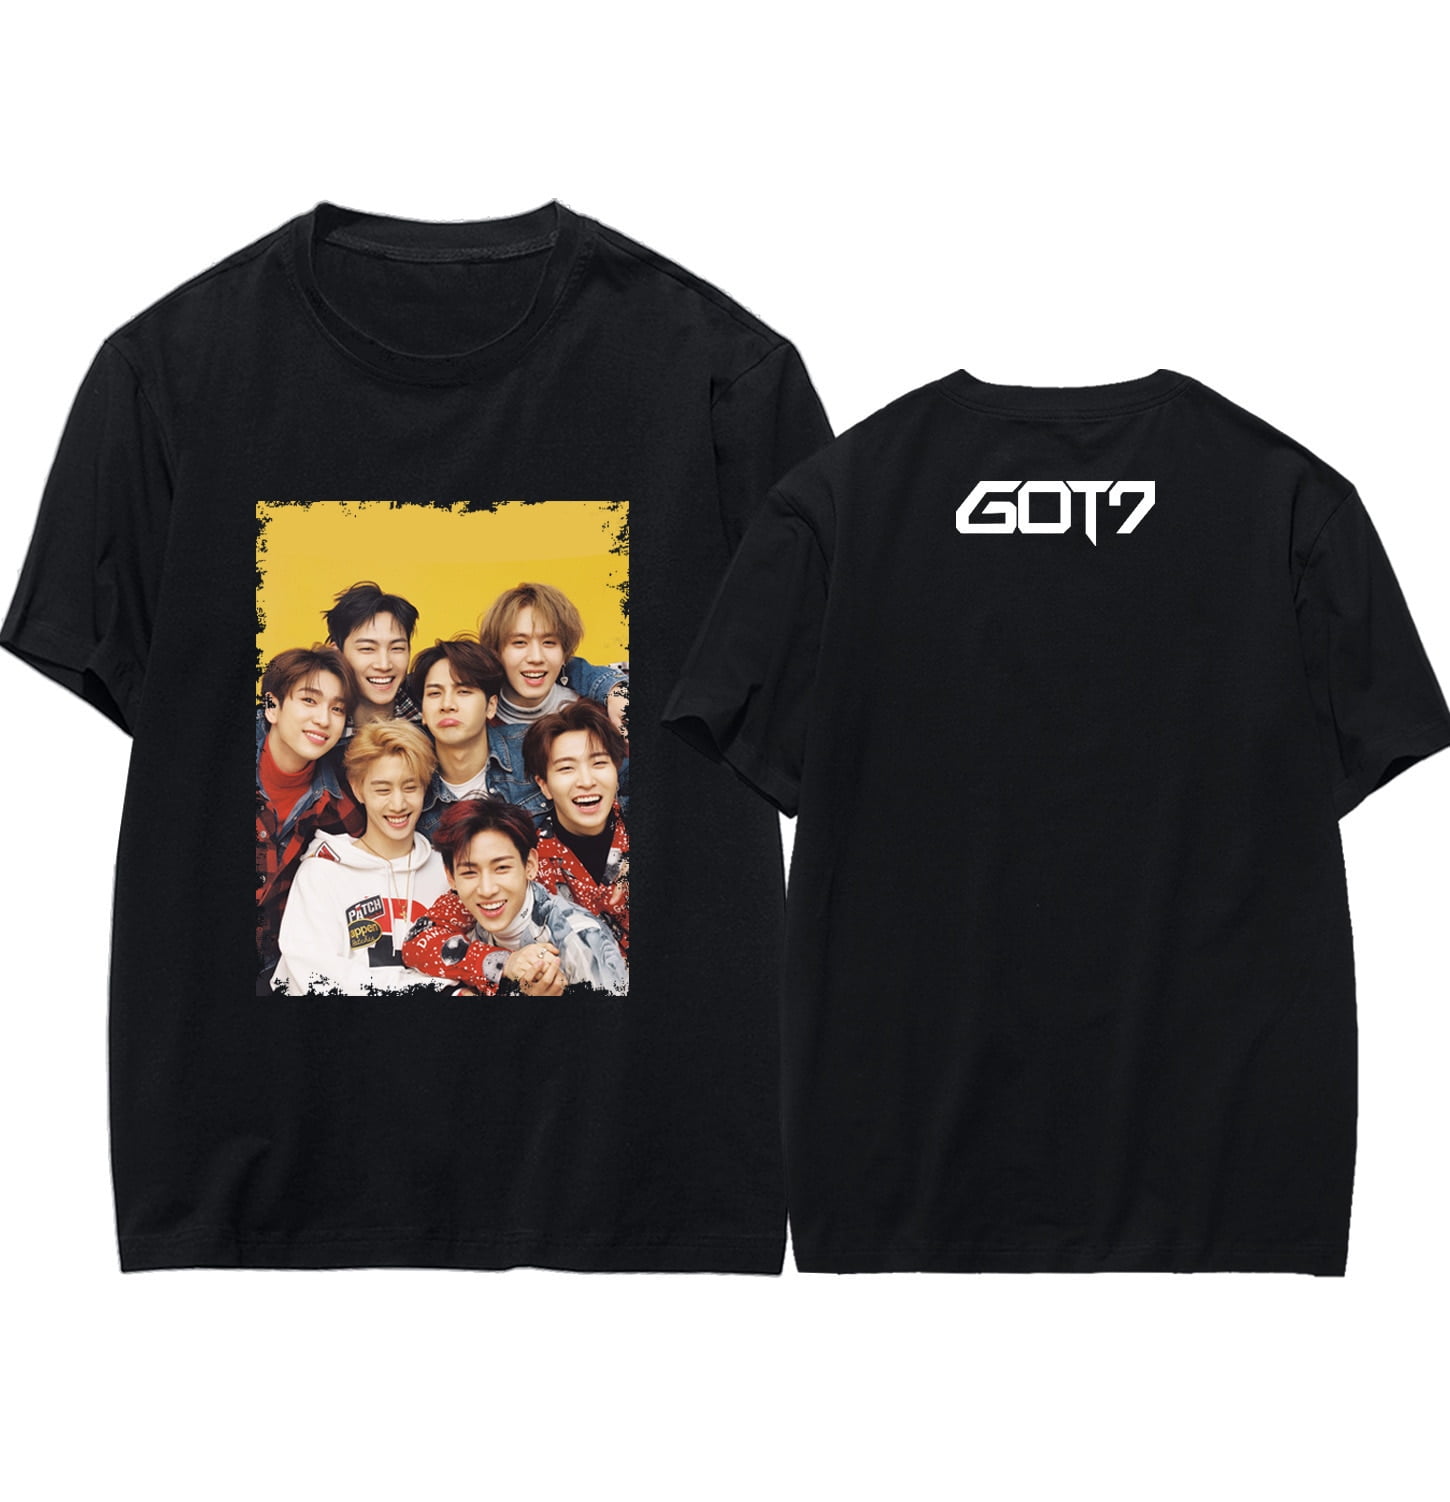 Buy Got7 All Members T-Shirts (Official) Online KpopHeart